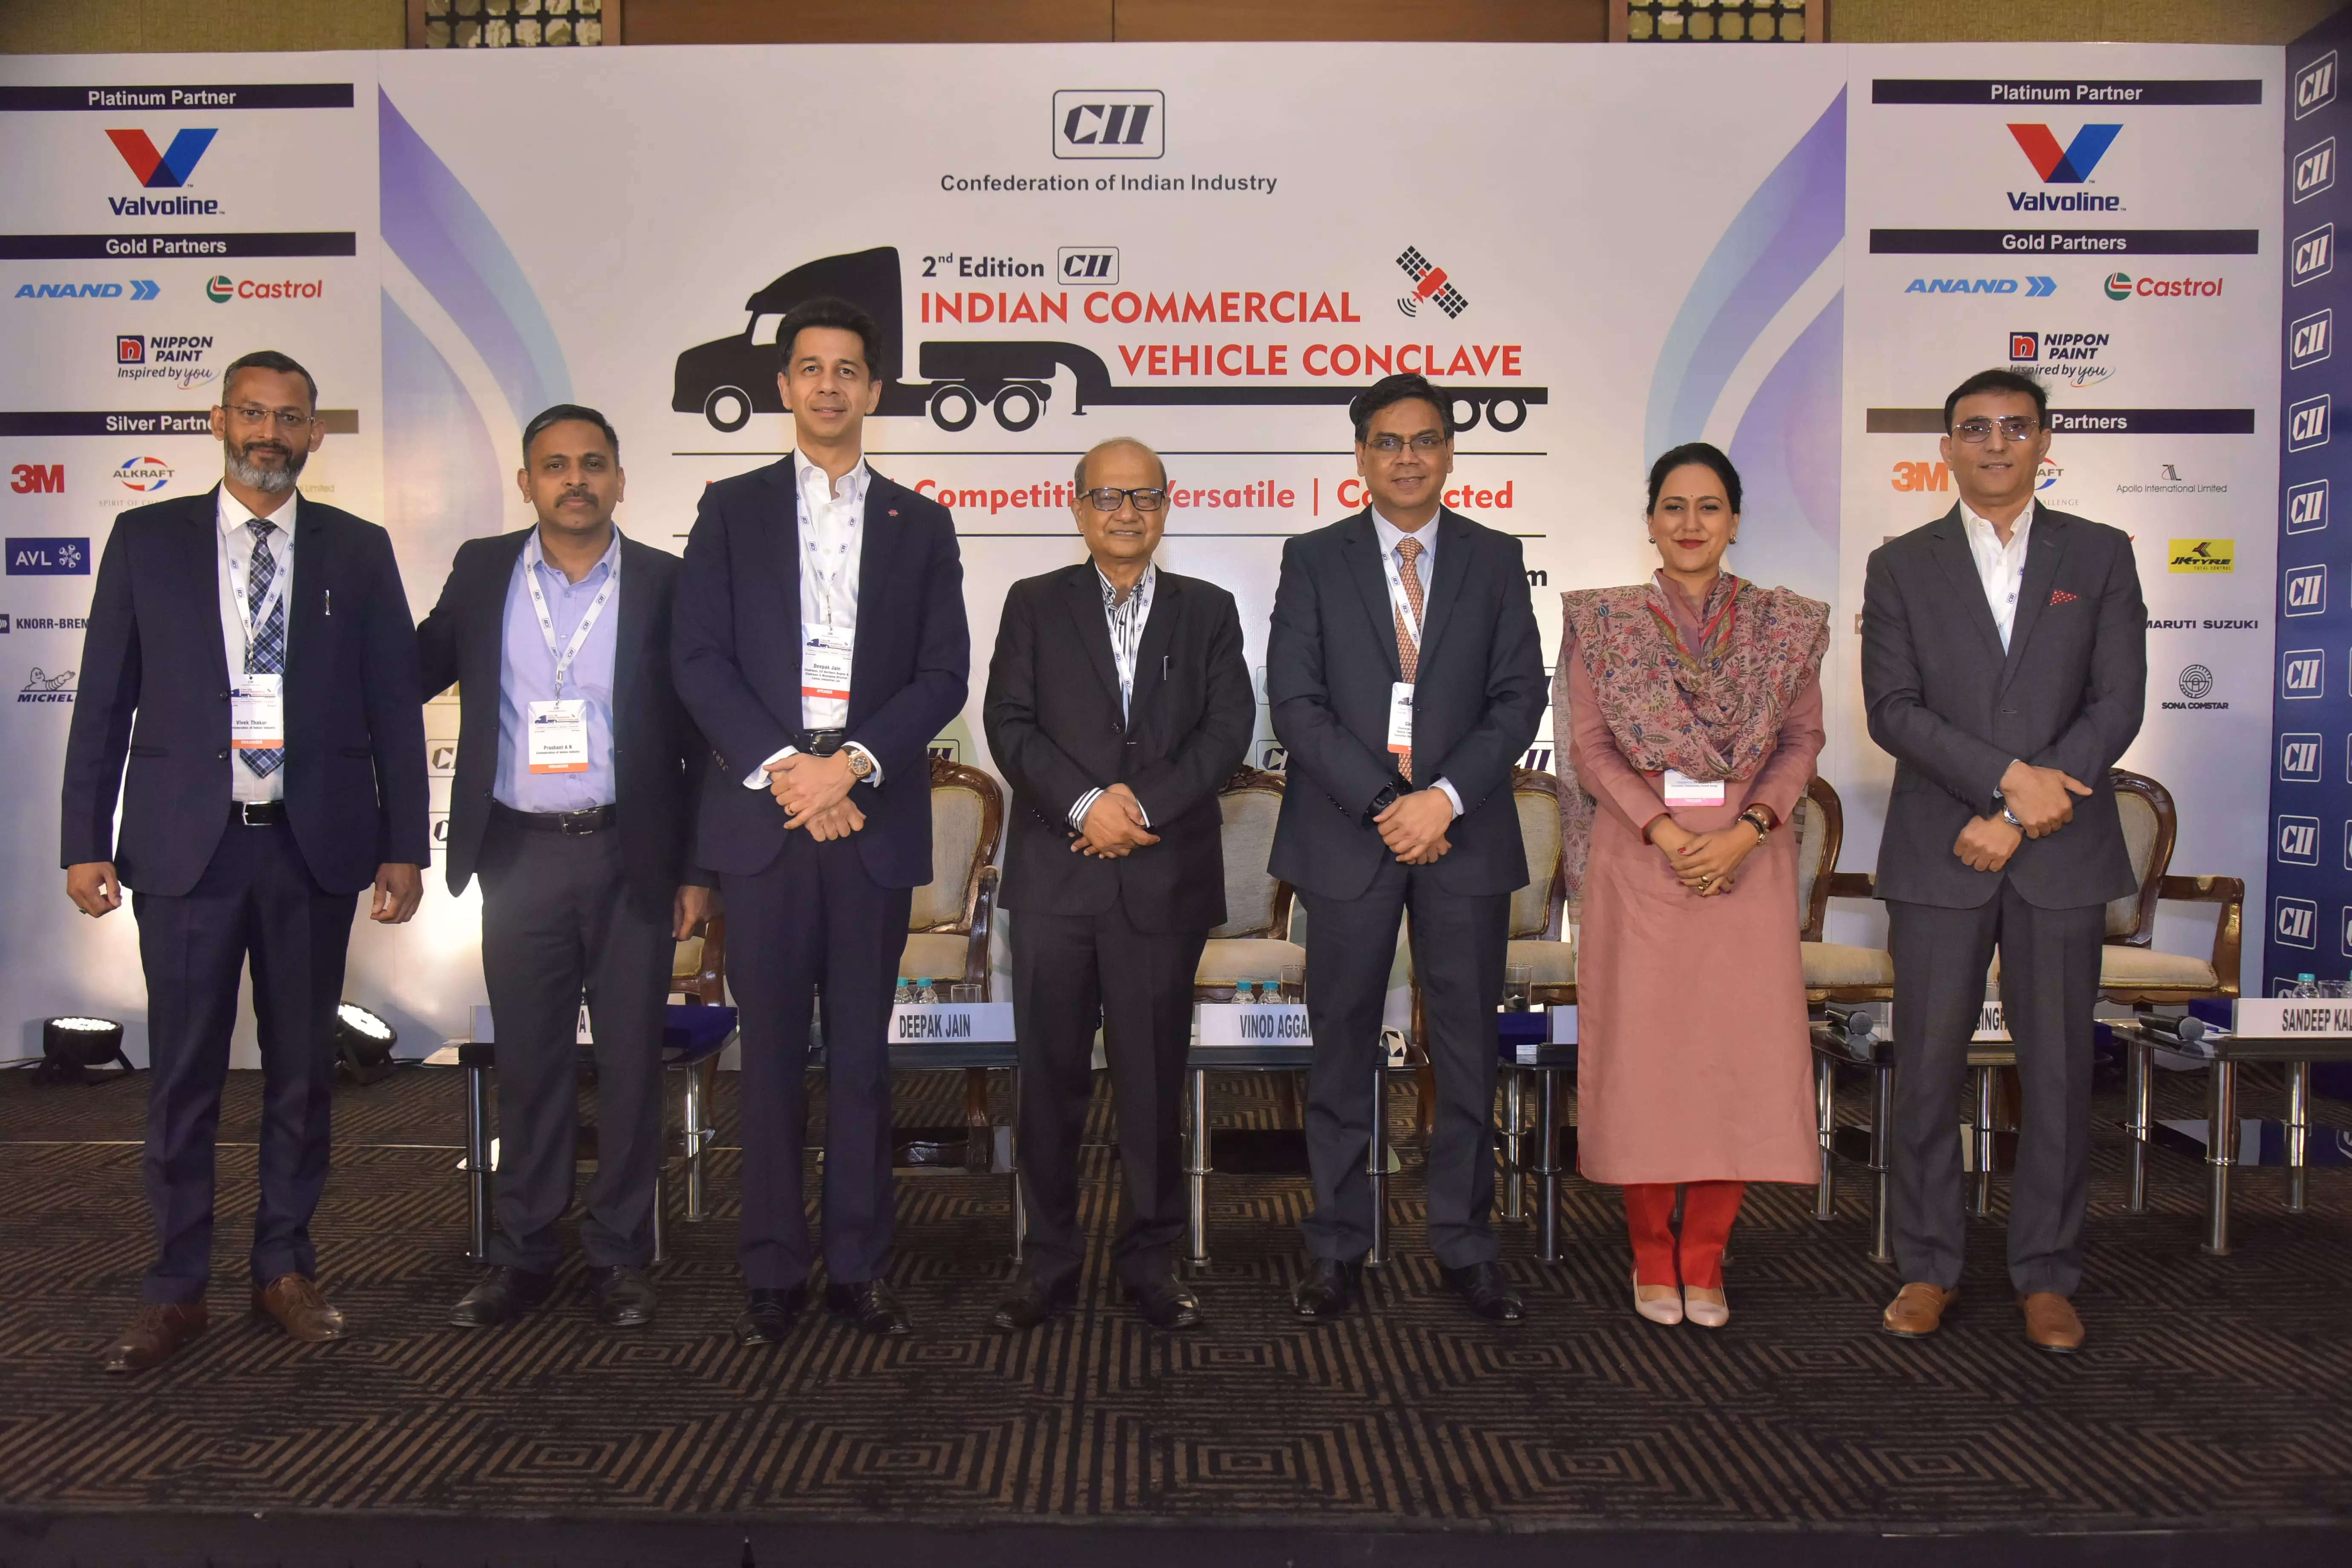 <p>Indian Commercial Vehicle Conclave organised by the CII</p>